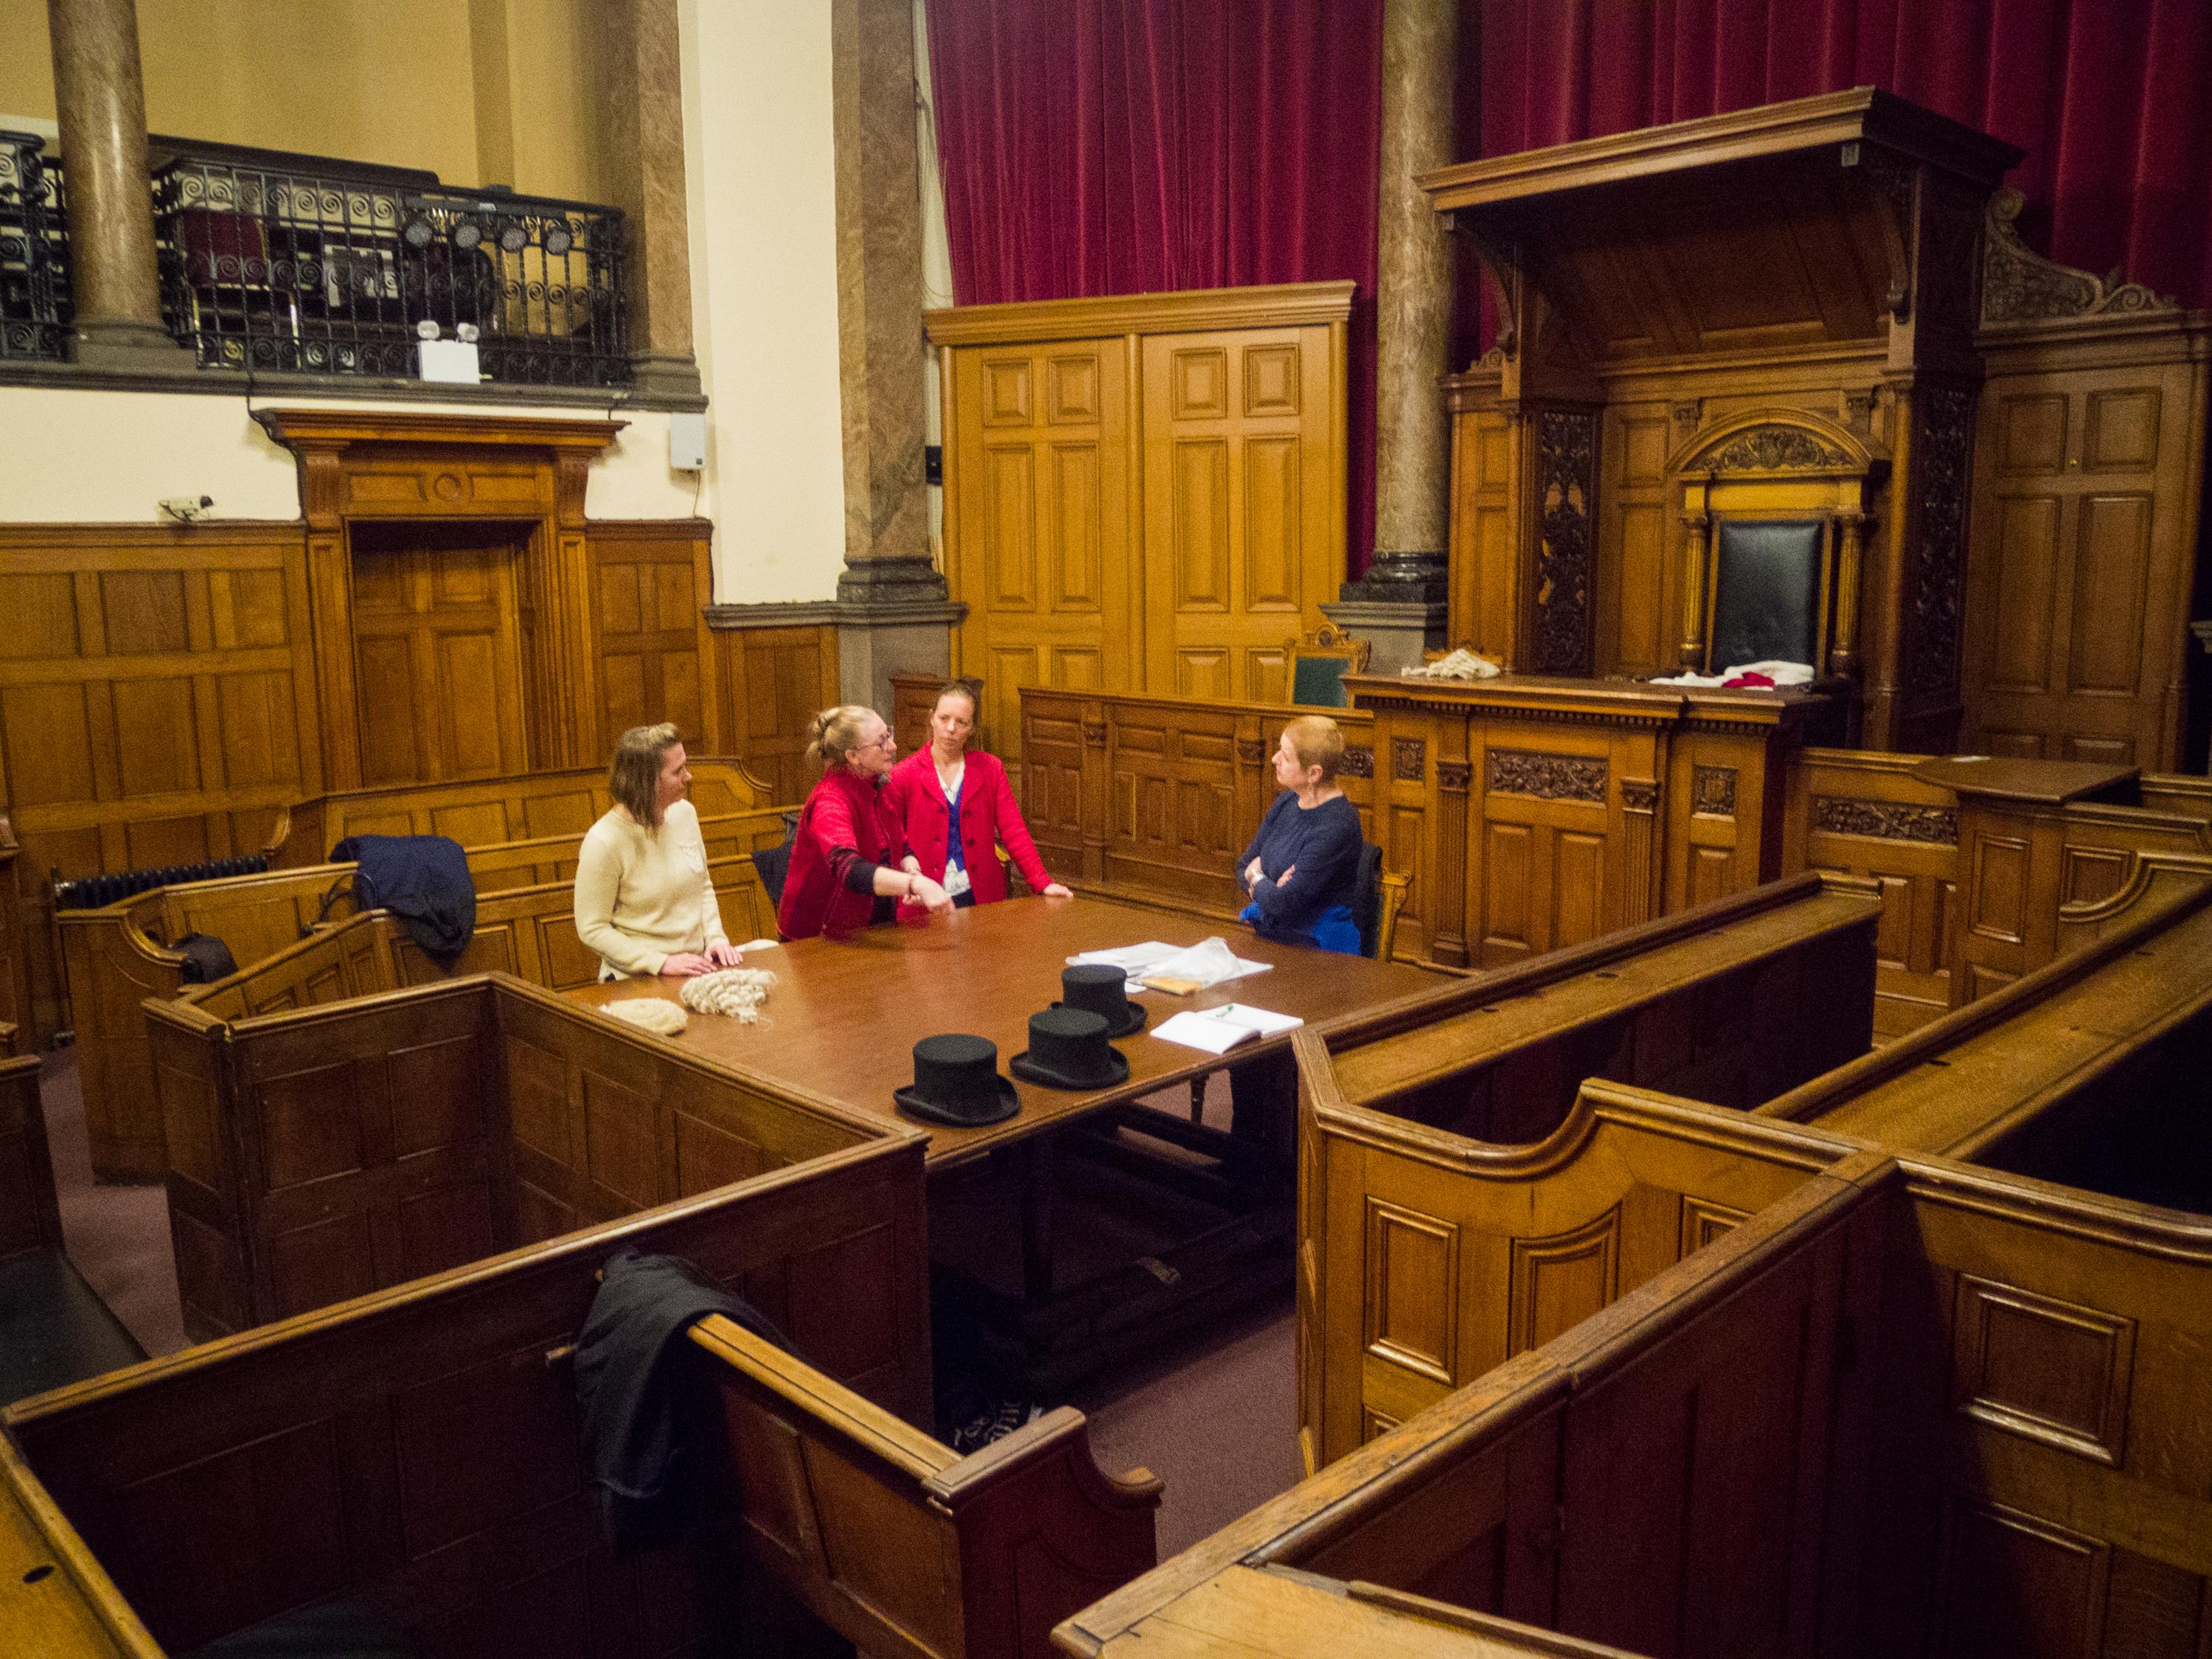 Planning the garment autopsy in the court room